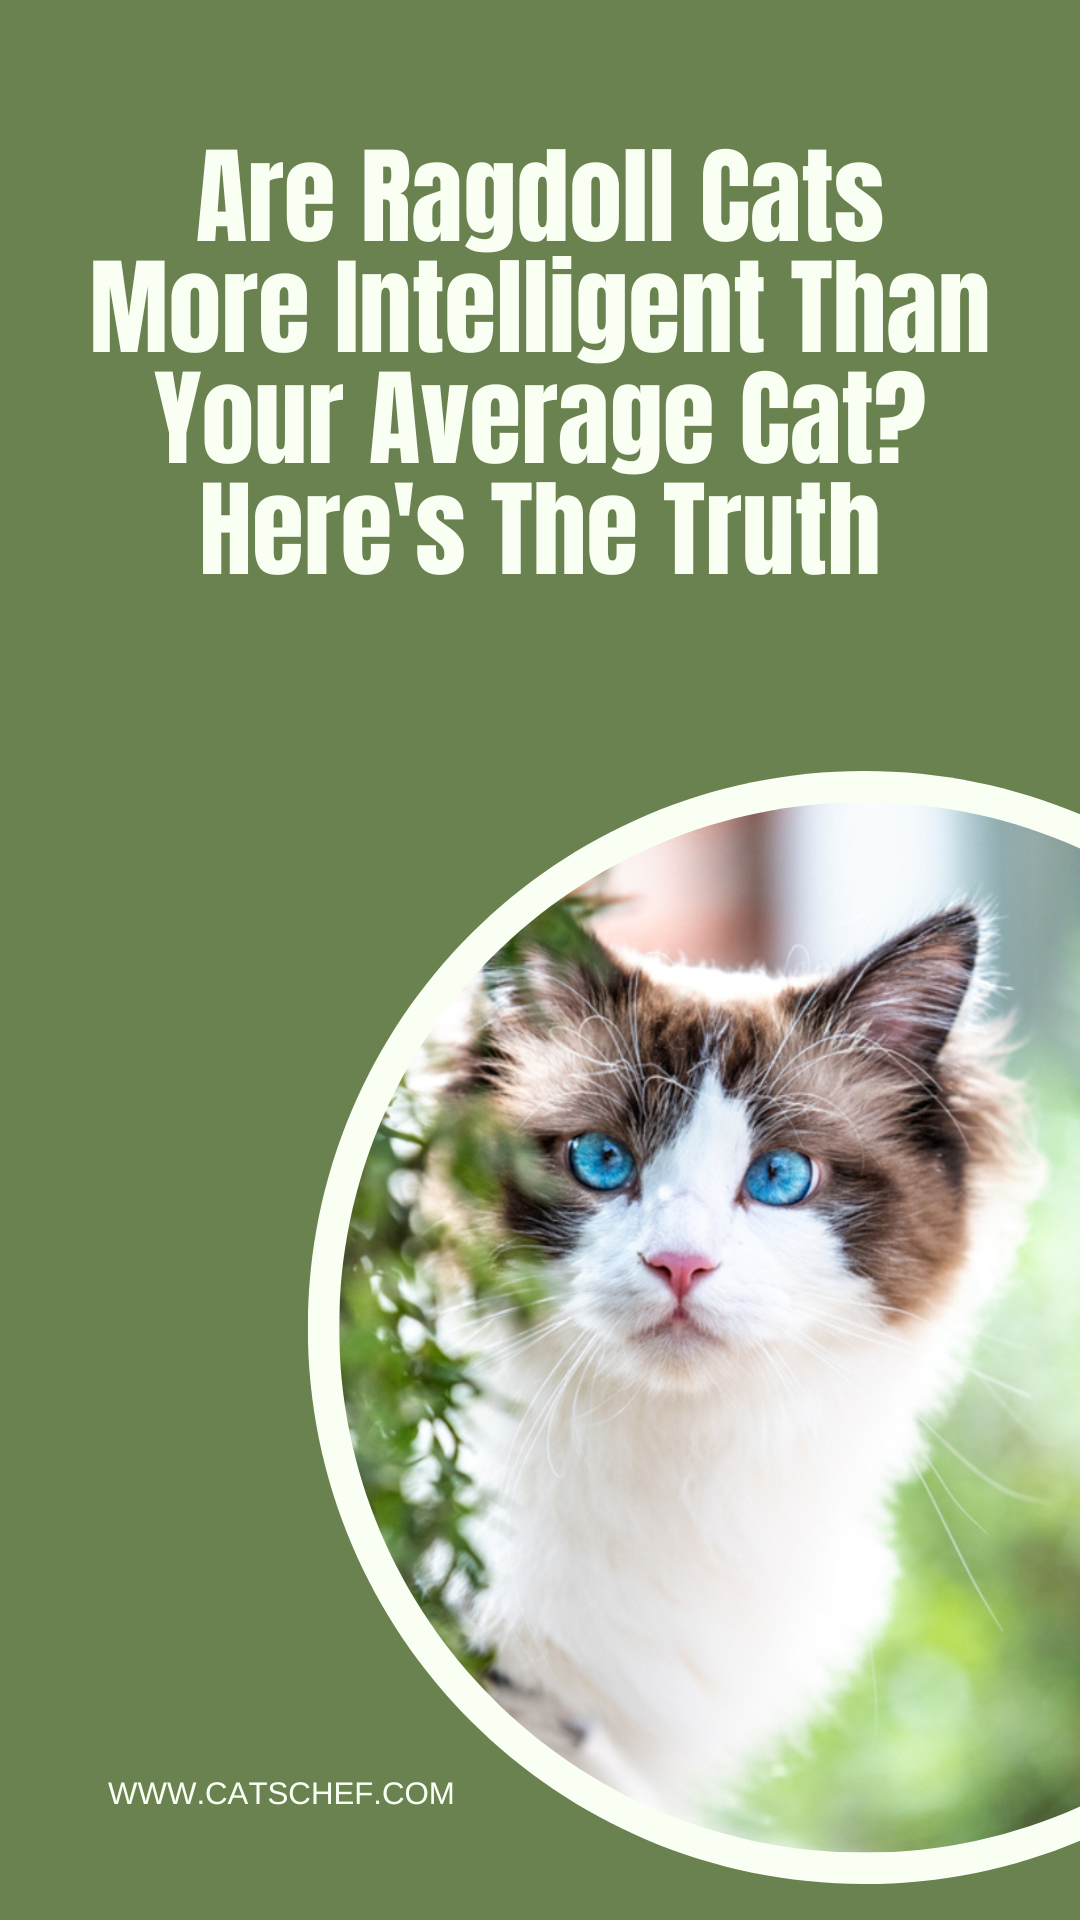 Are Ragdoll Cats More Intelligent Than Your Average Cat? Here's The Truth